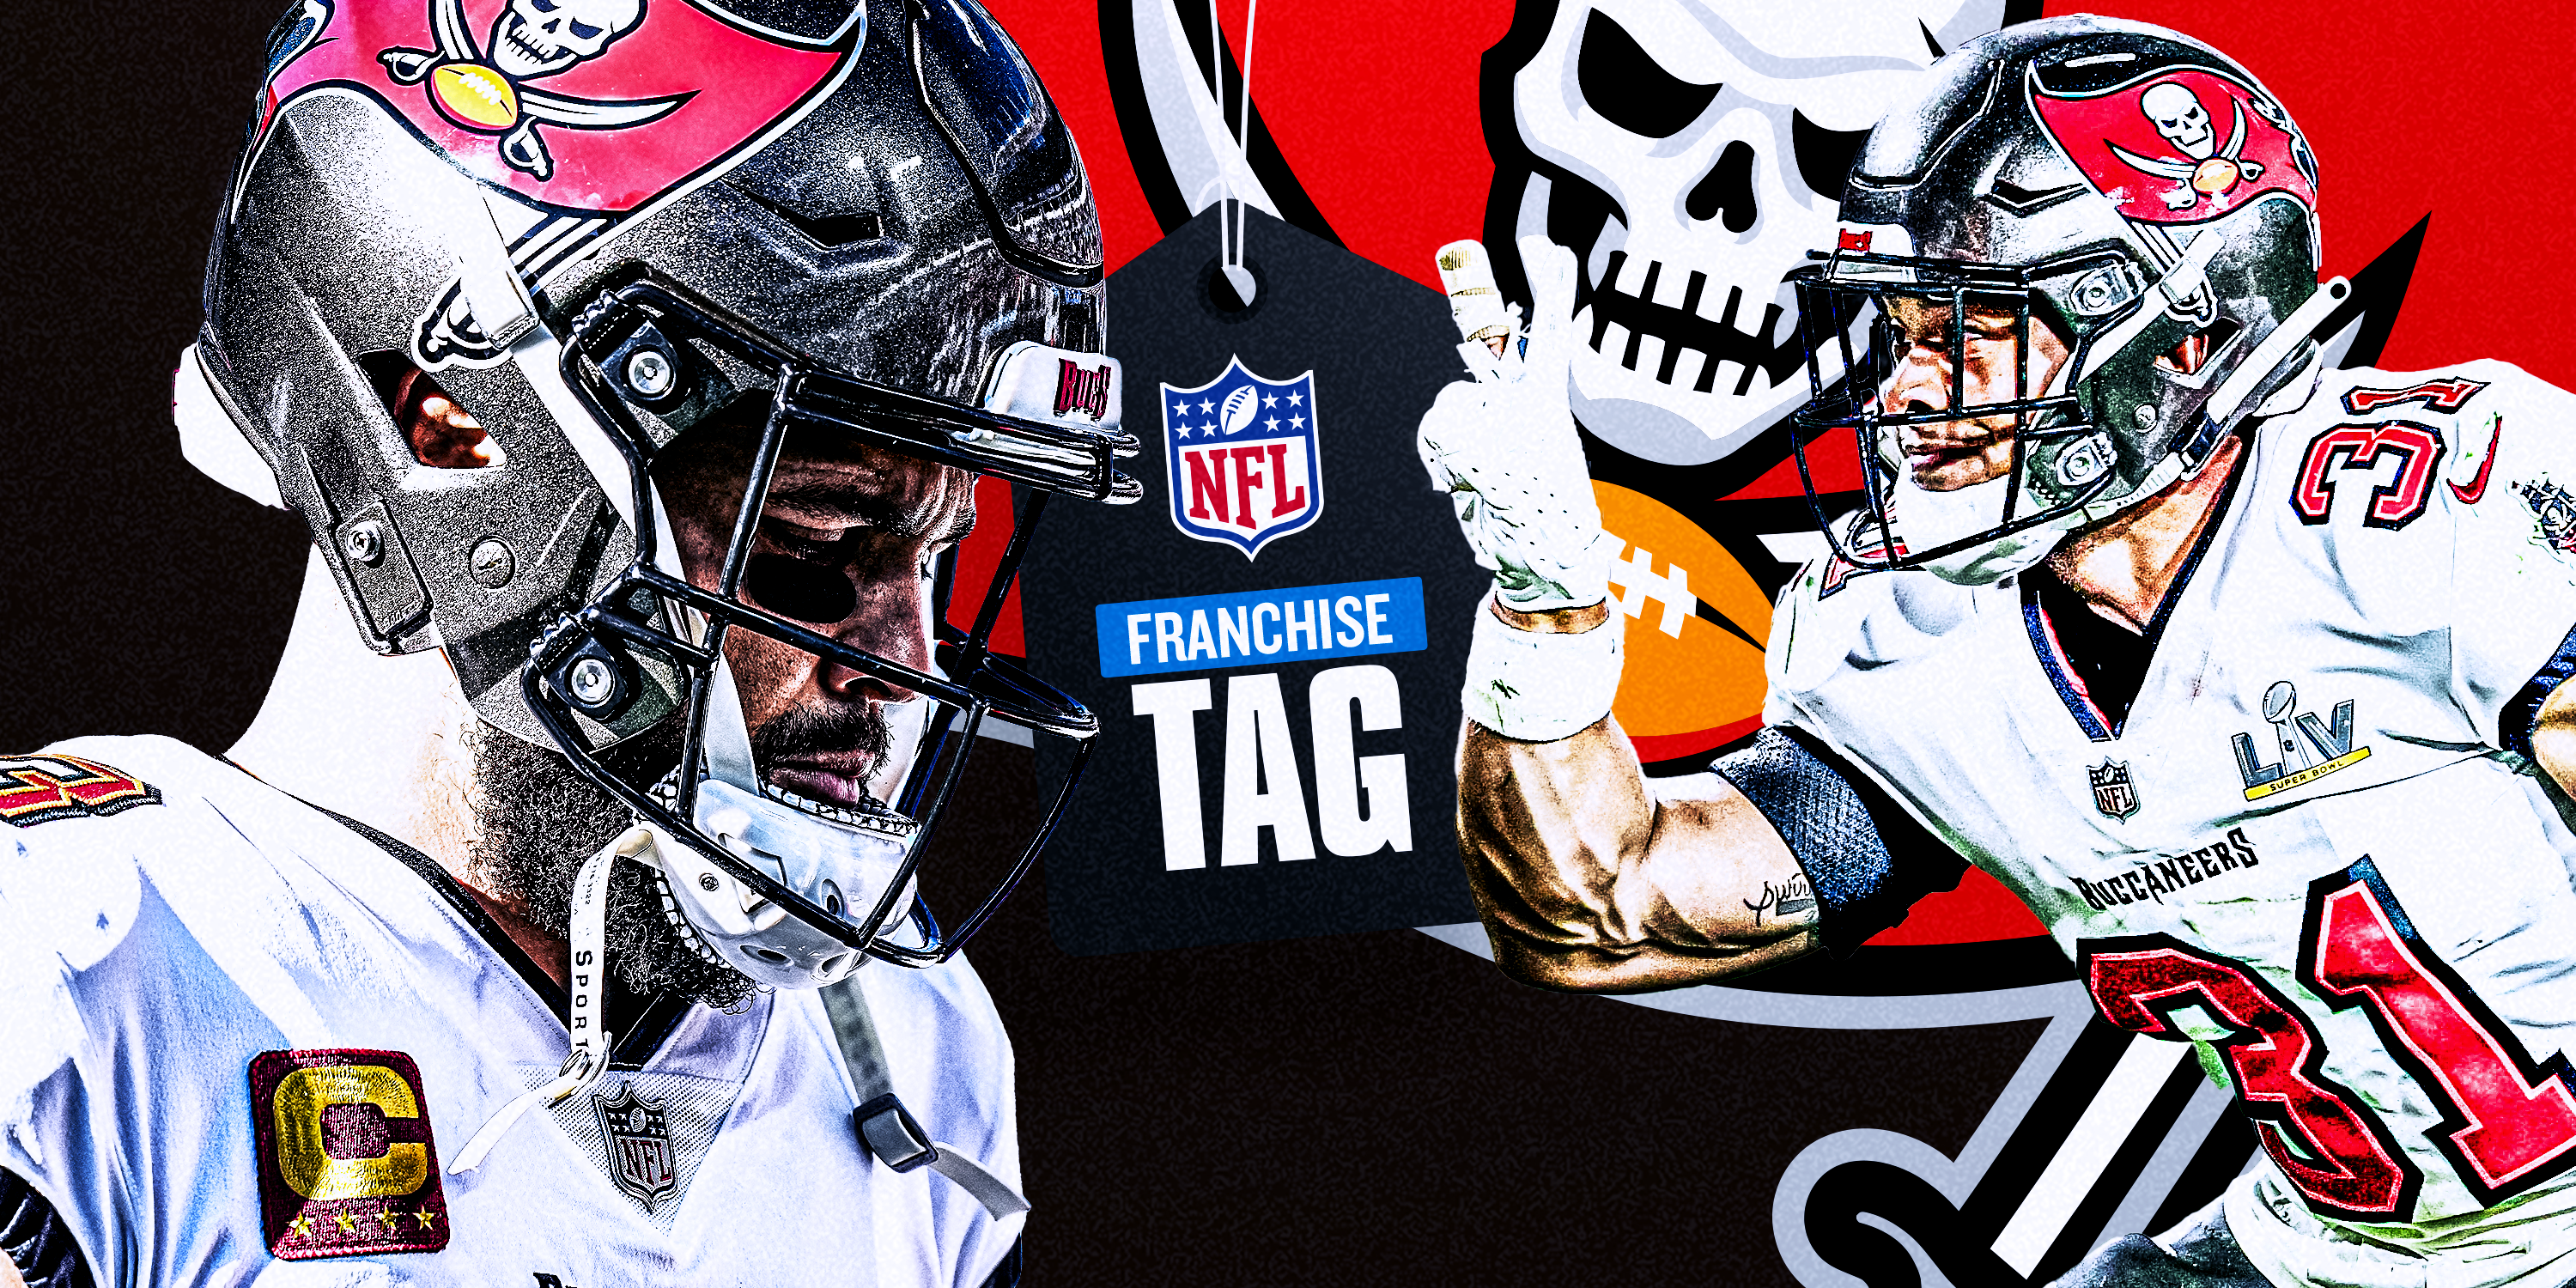 Buccaneers franchise tag